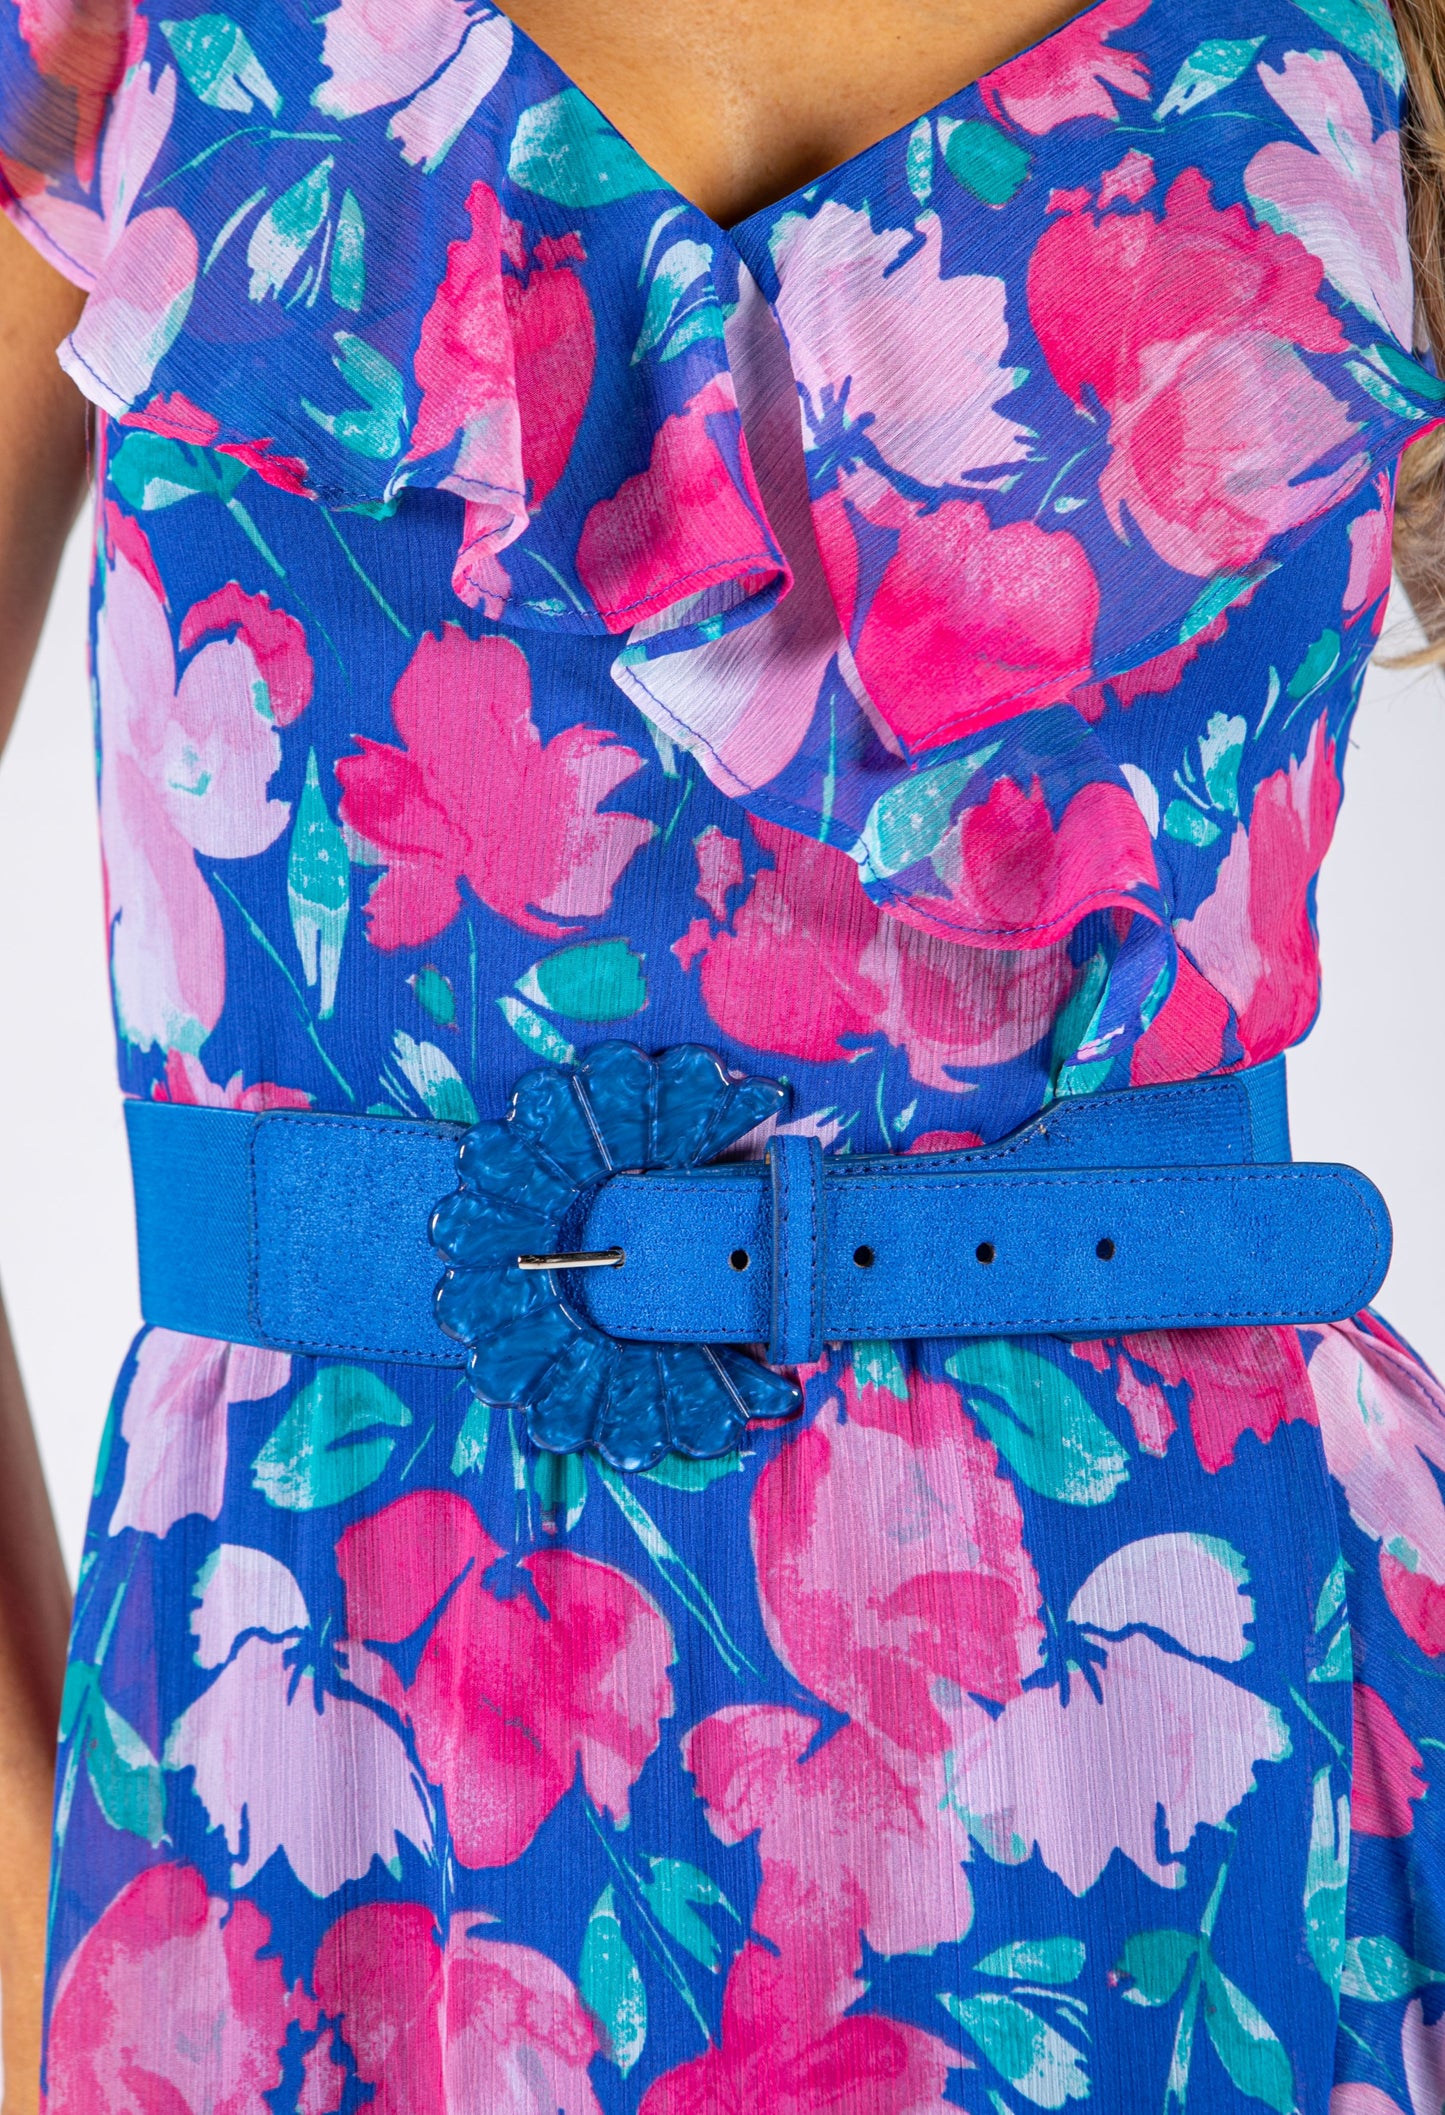 Elasticated Belt with Scalloped Buckle